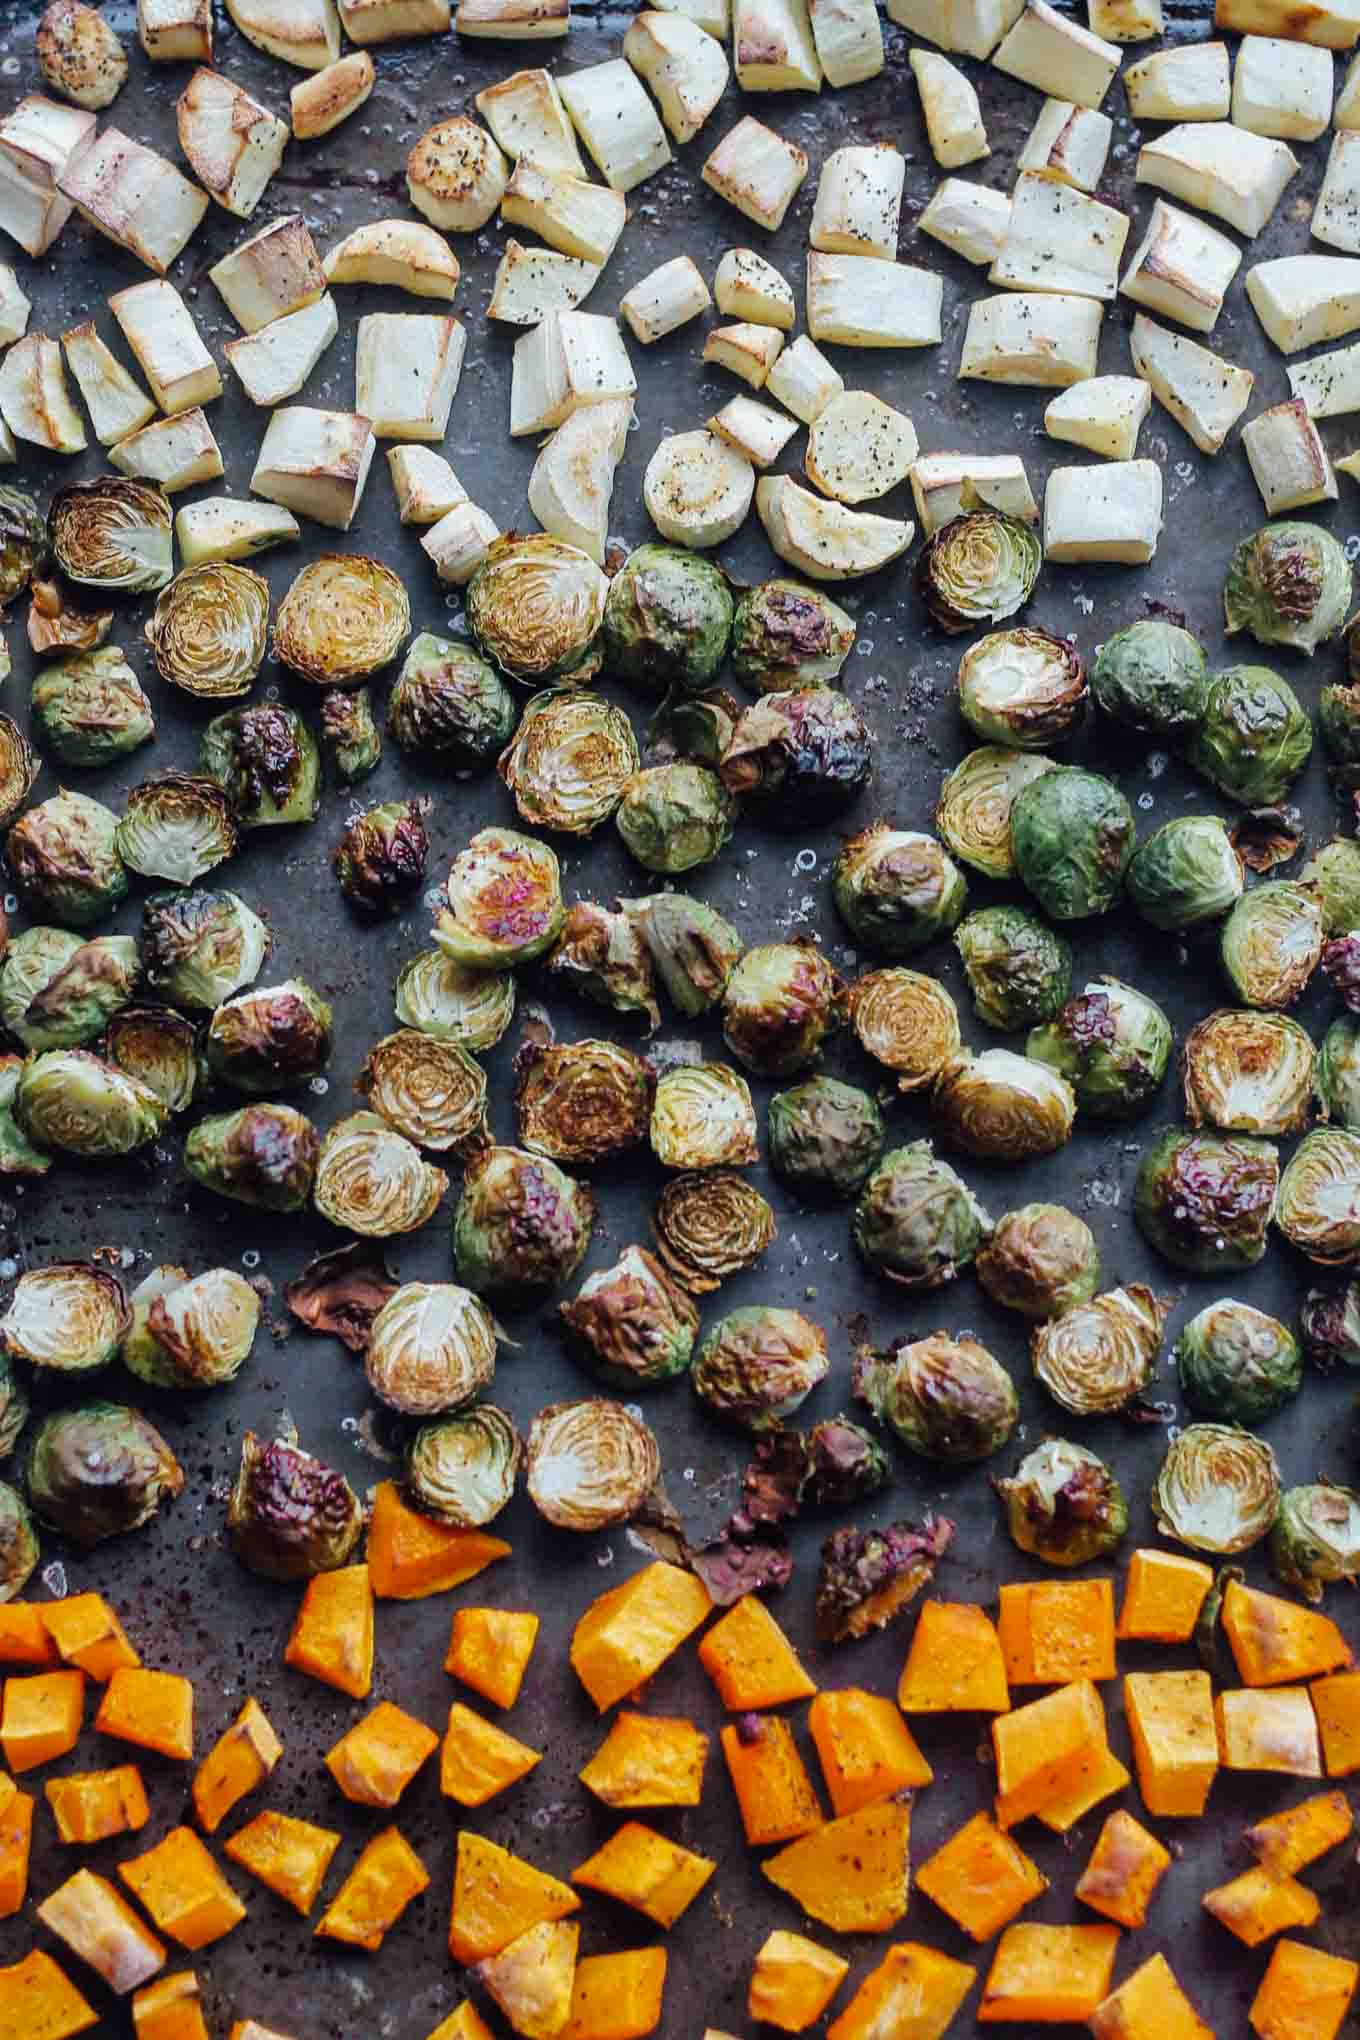 Roasted parsnips, Brussels sprouts, and butternut squash on a sheet pan